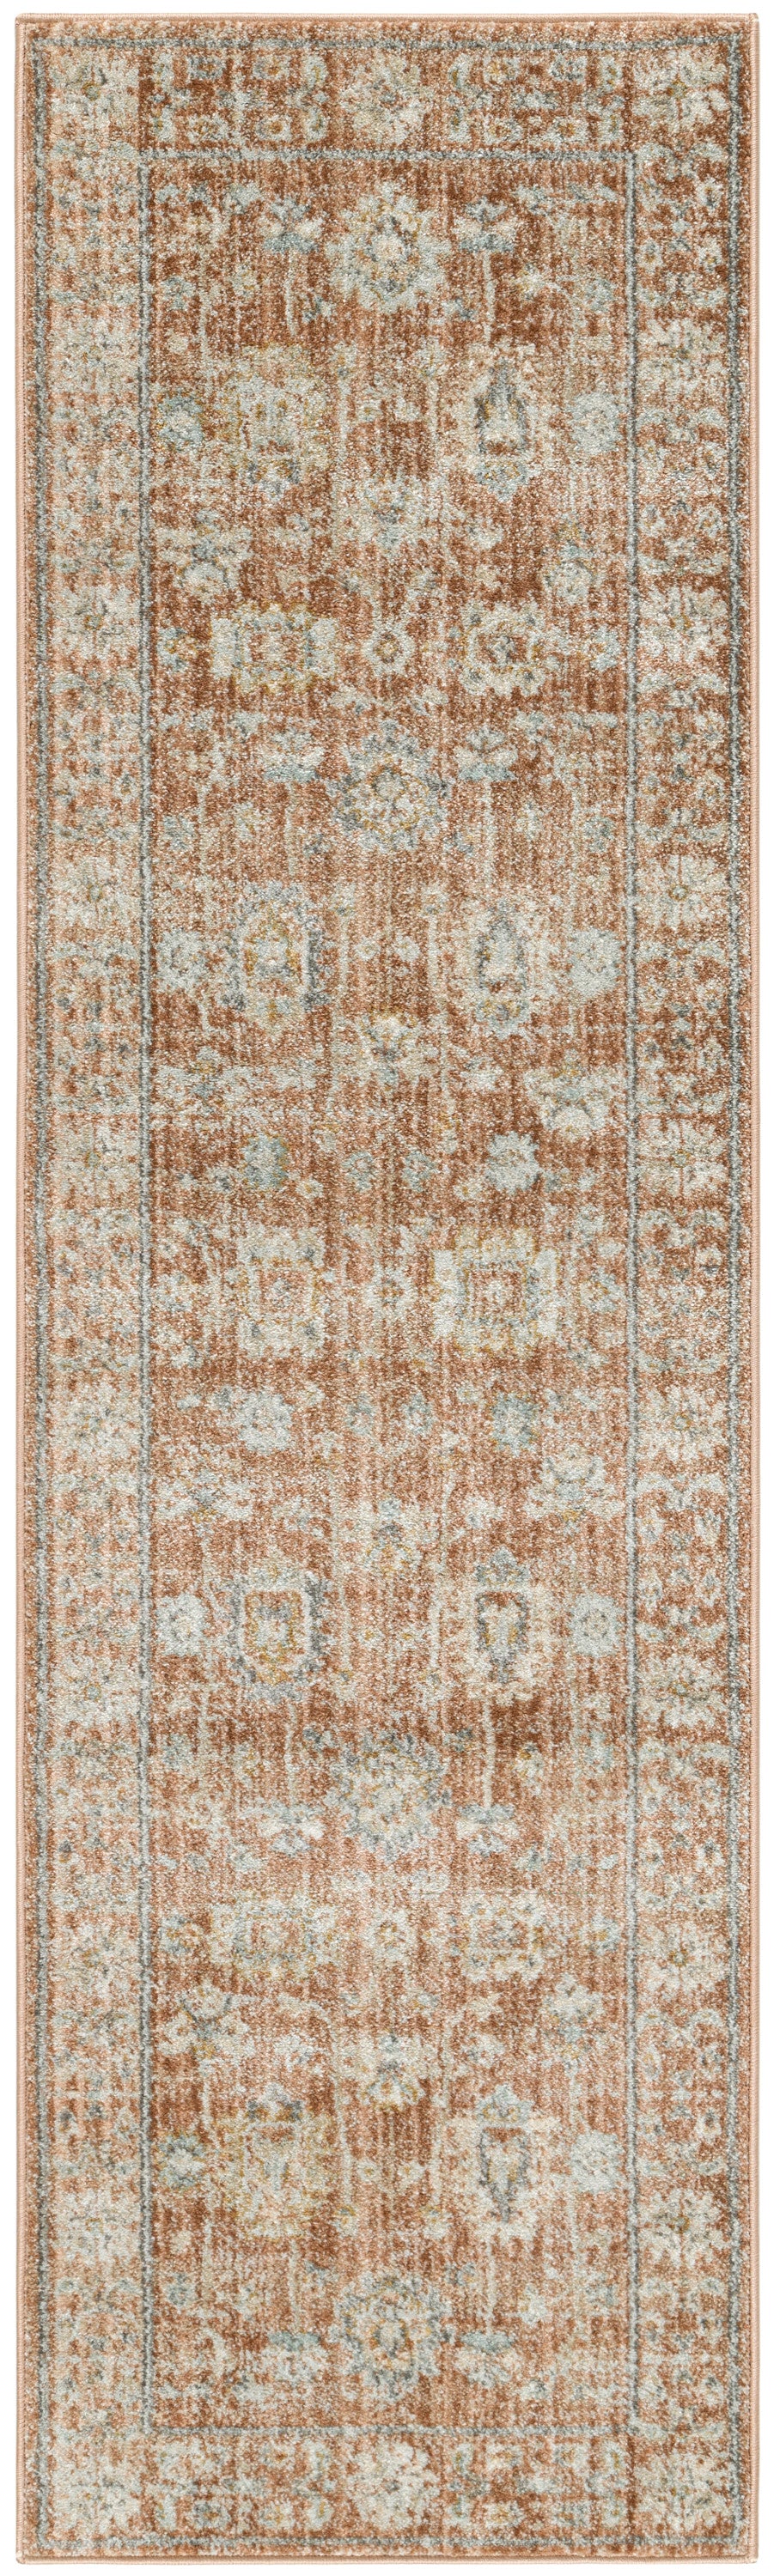 Nourison Home Oases OAE01 Terracotta Traditional Machinemade Rug